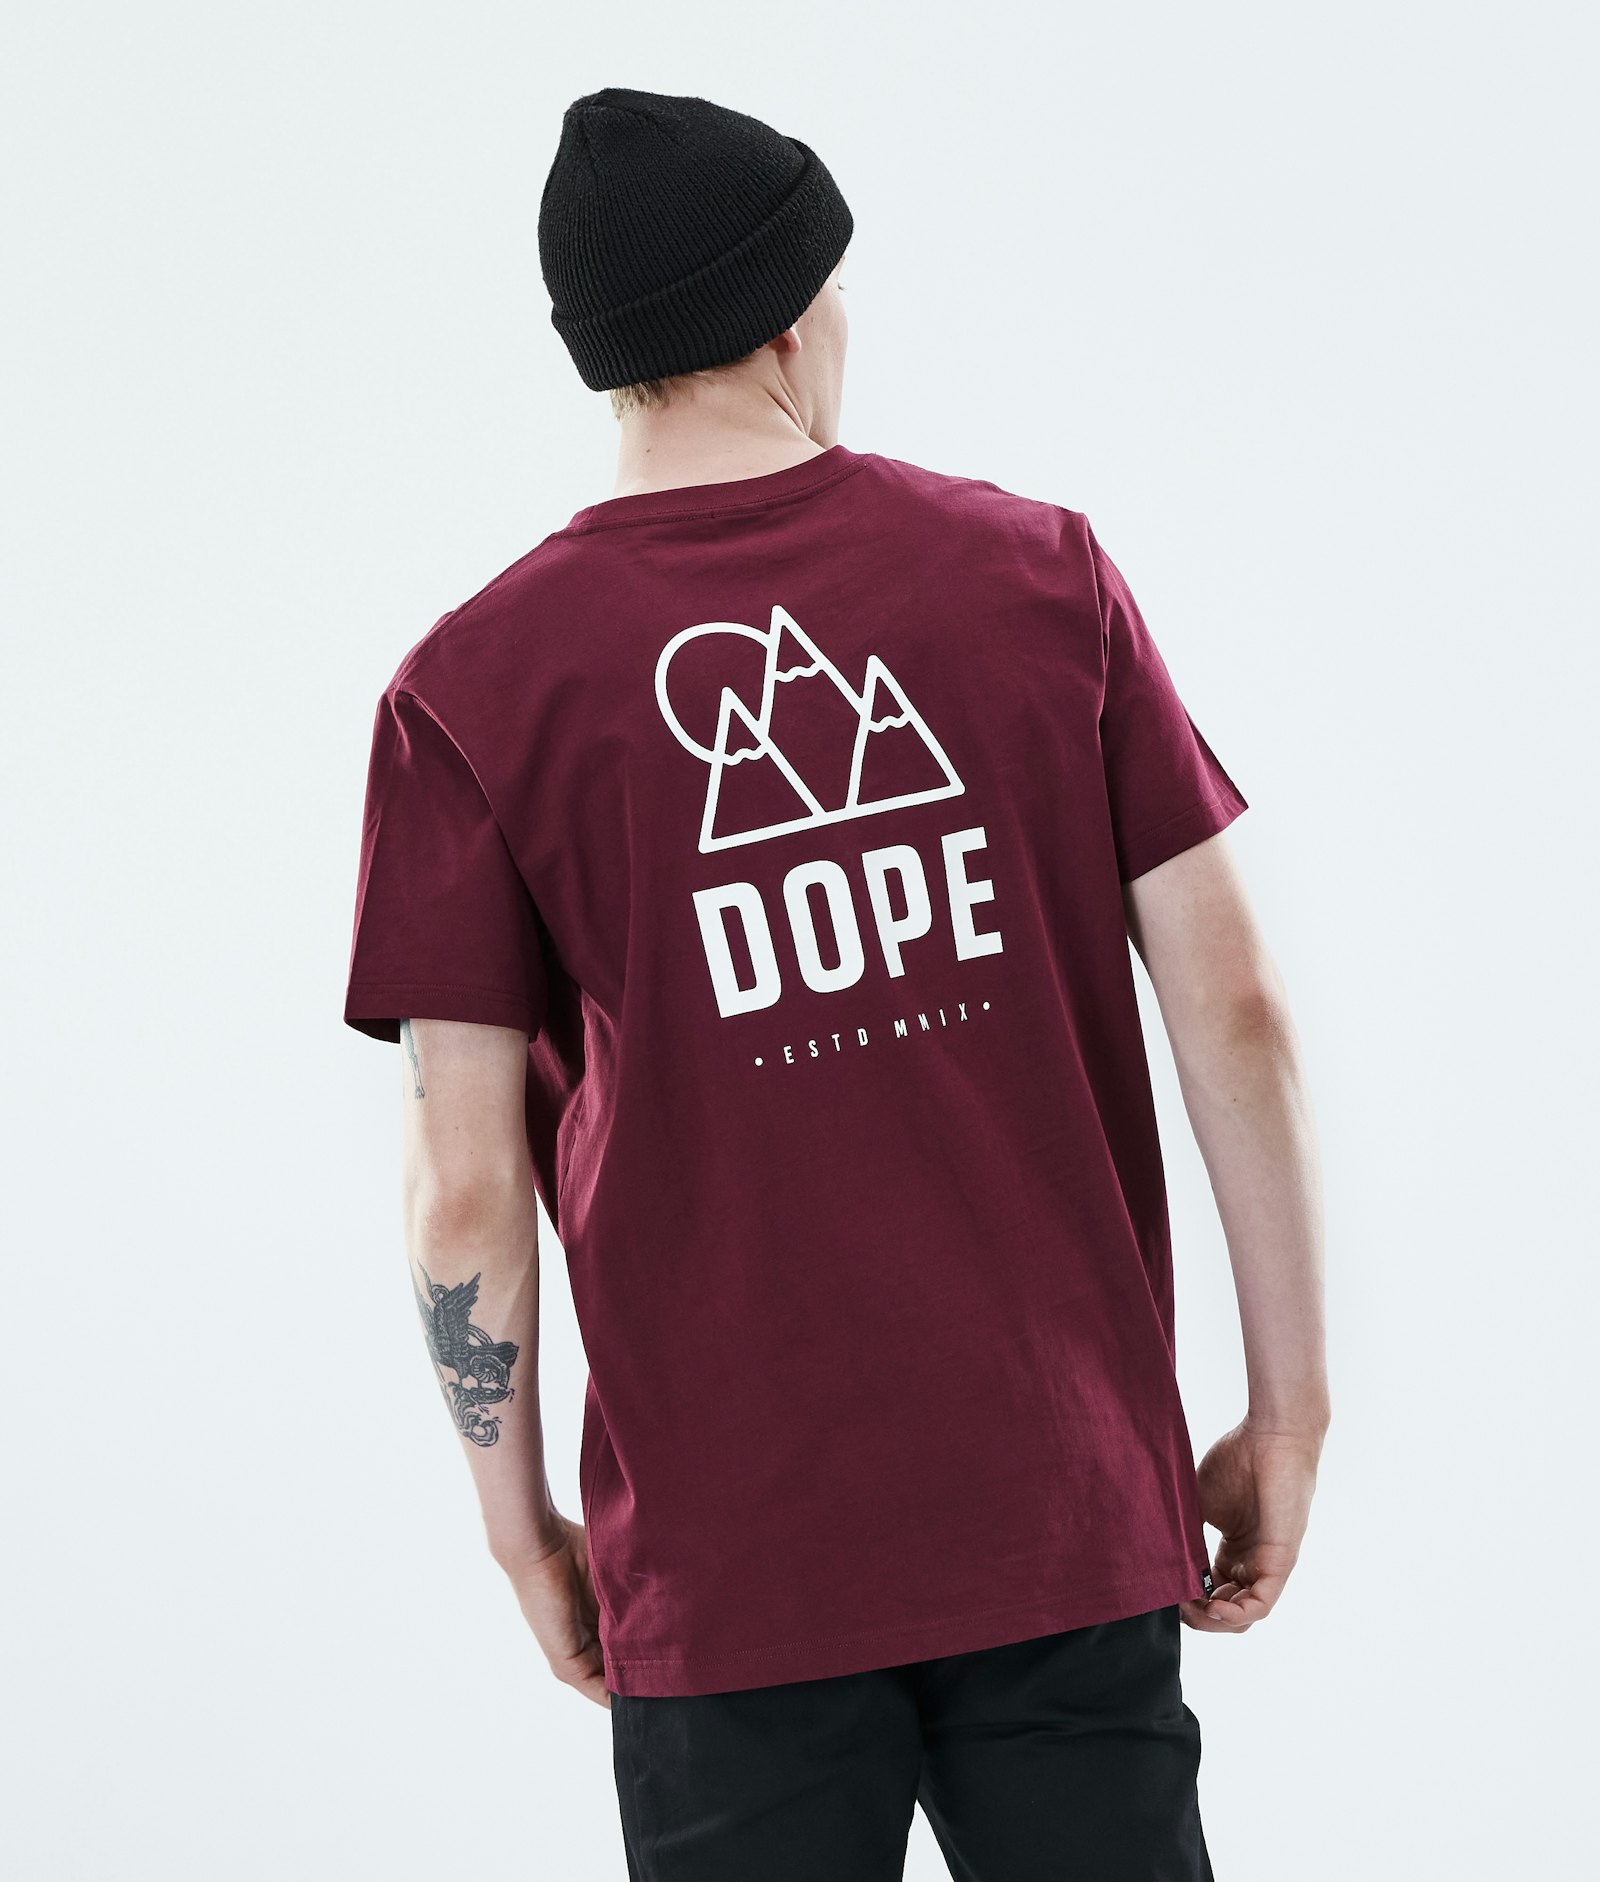 Dope Daily T-shirt Homme Rise Burgundy